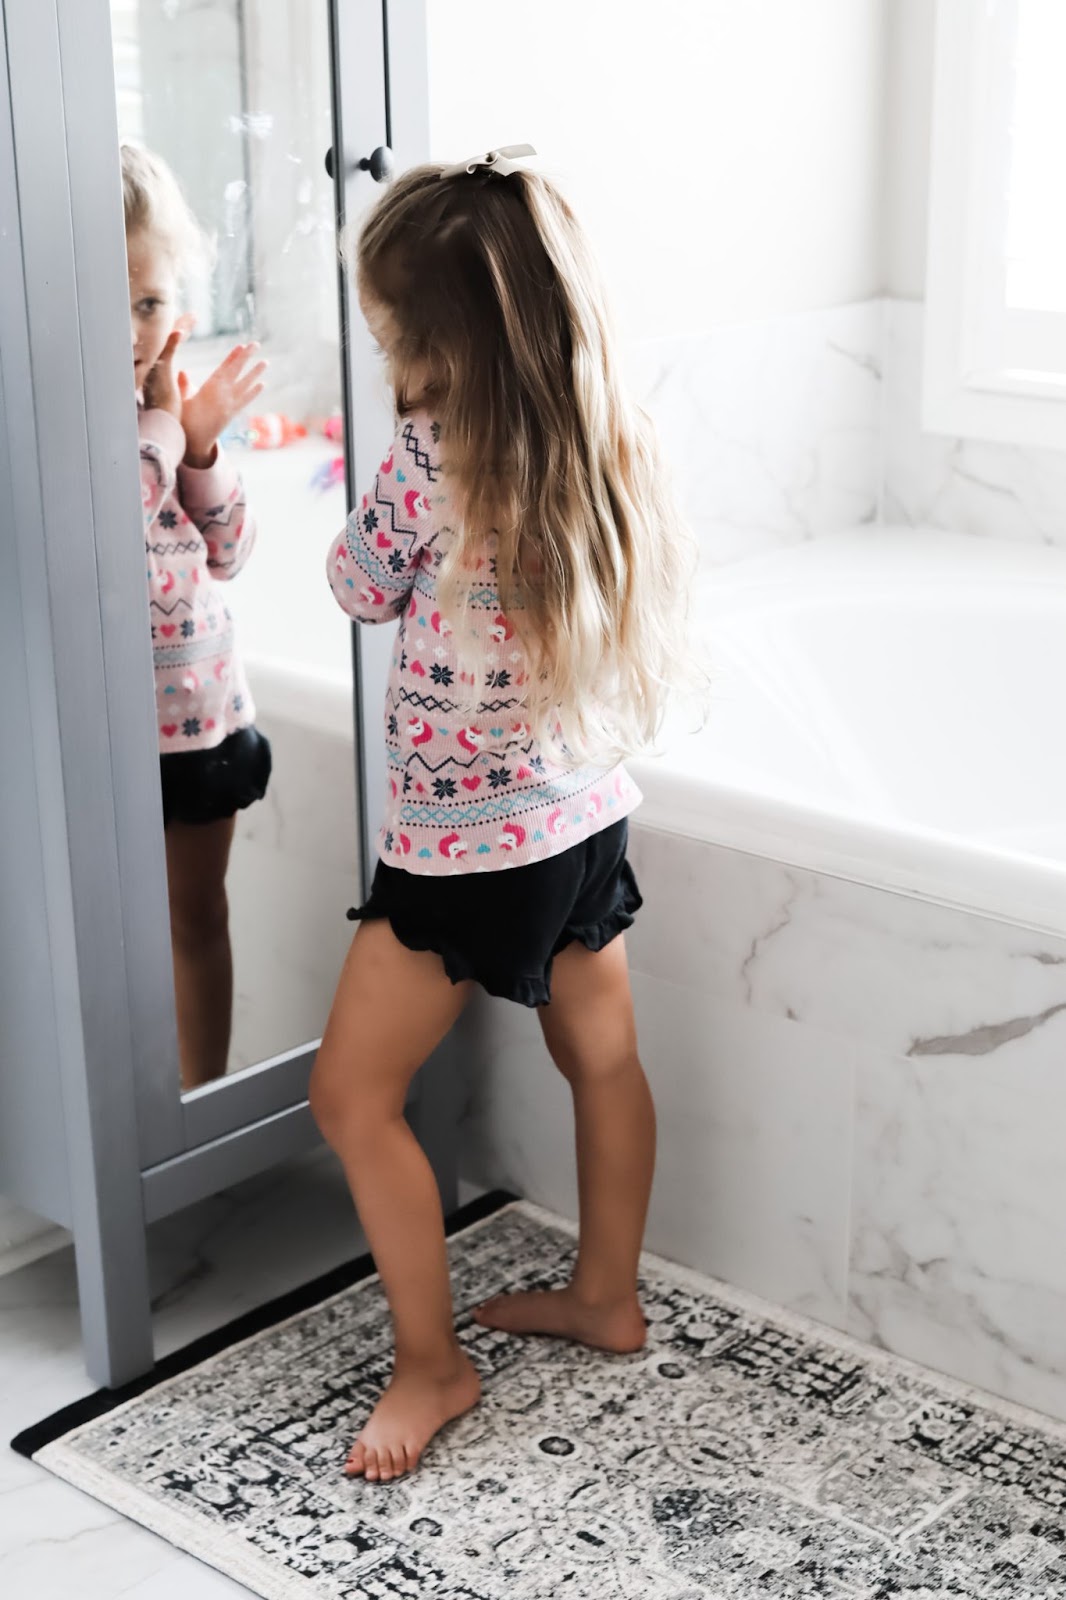 Medicine Cabinet Ideas by popular Atlanta lifestyle blog, City Peach: image of a little girl applying lipstick while looking at herself in a mirror. 